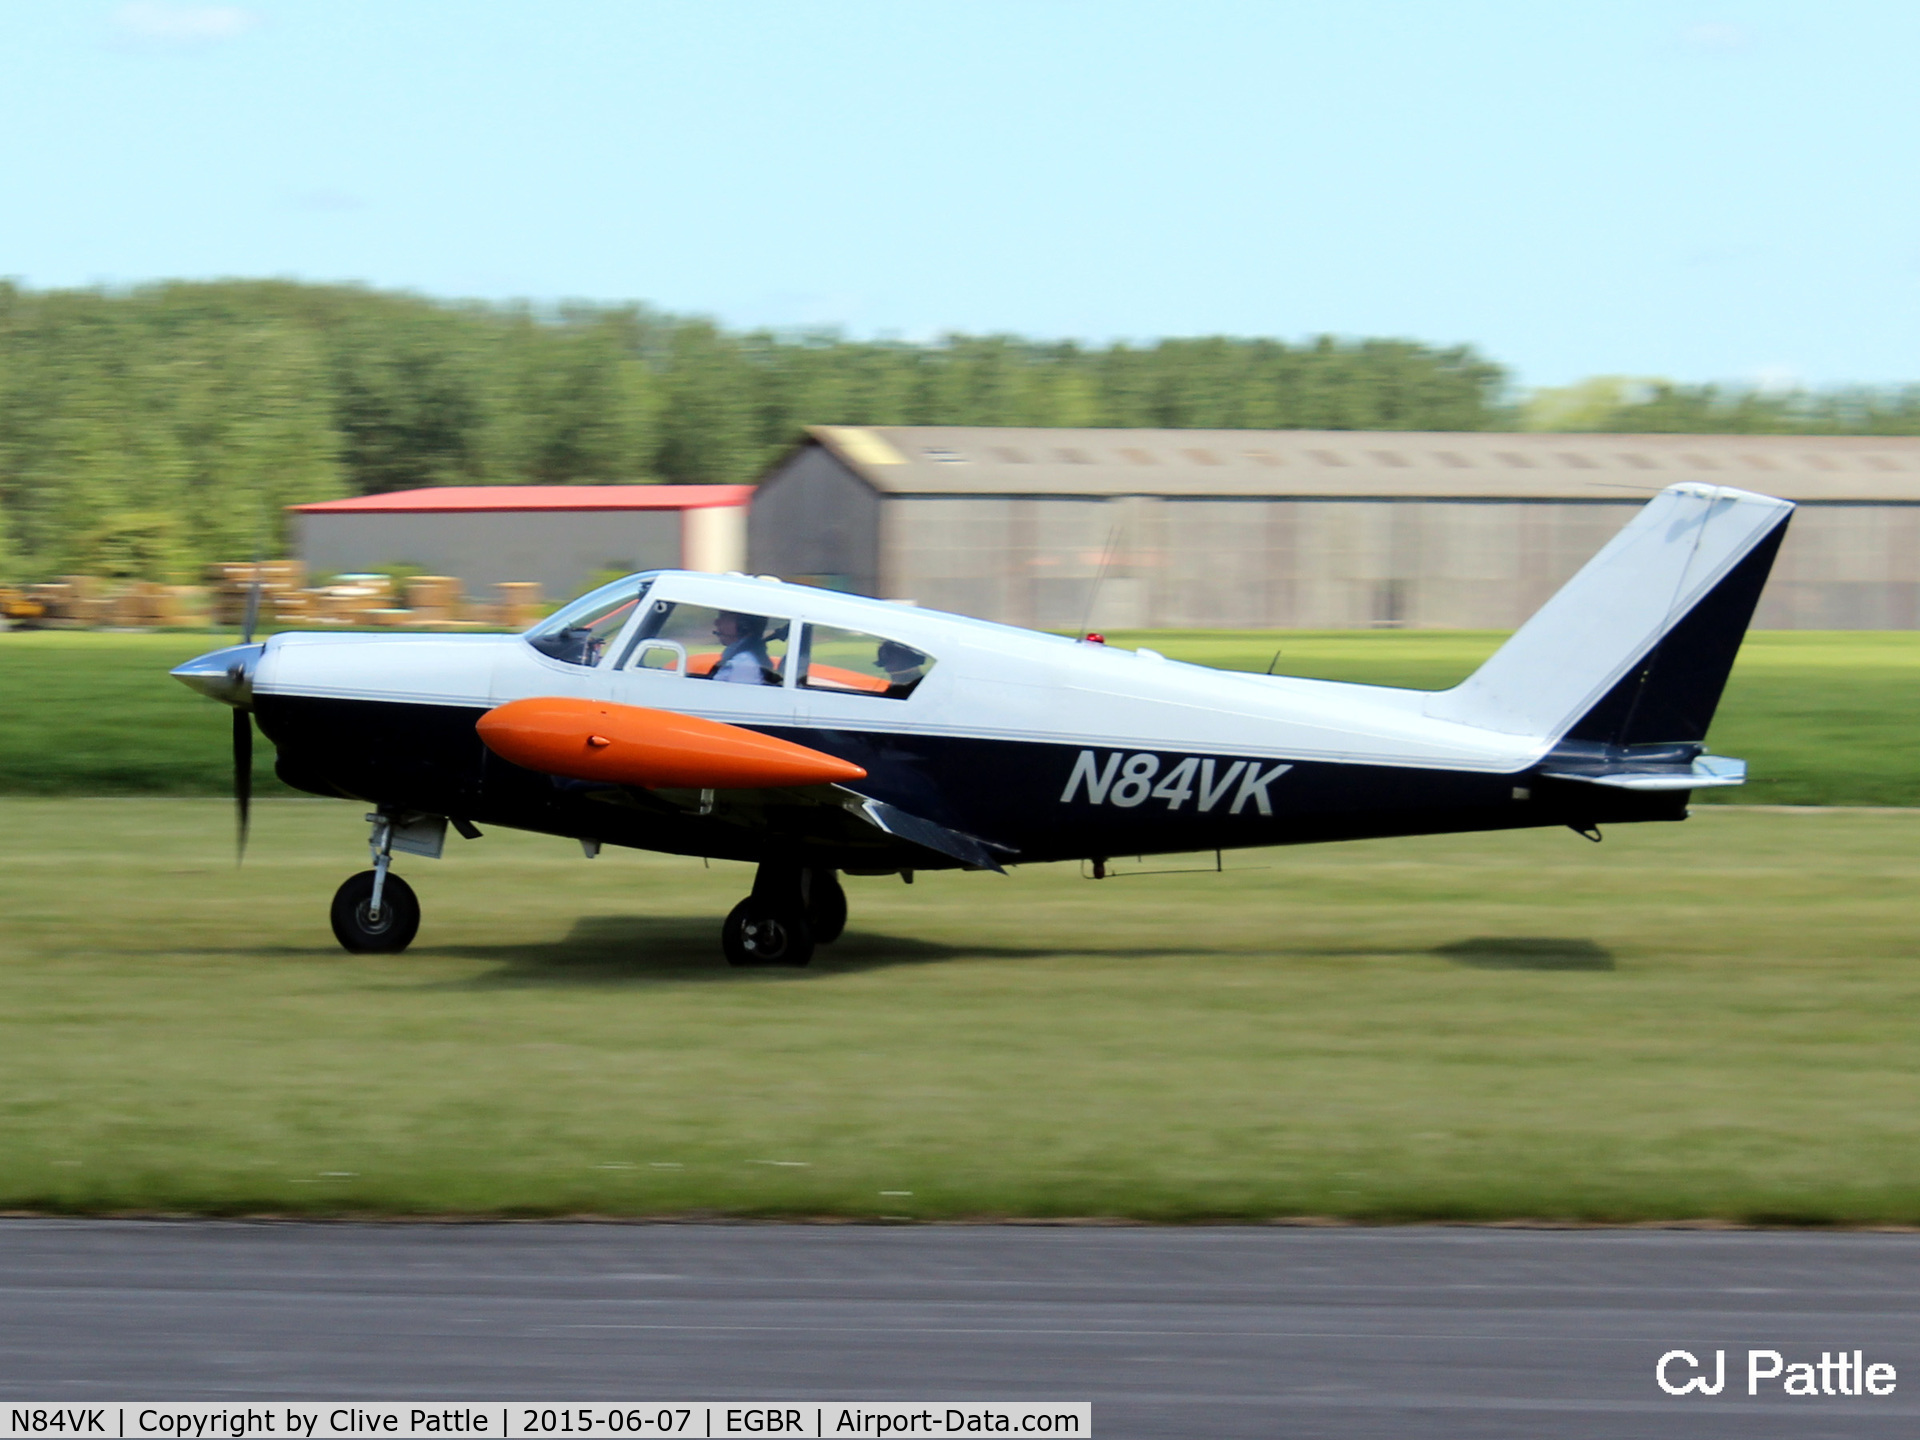 N84VK, Piper PA-24-250 Comanche C/N 24-1492, Arriving at The Real Aeroplane Company Ltd Radial Fly-In, Breighton Airfield, Yorkshire, U.K.  - EGBR